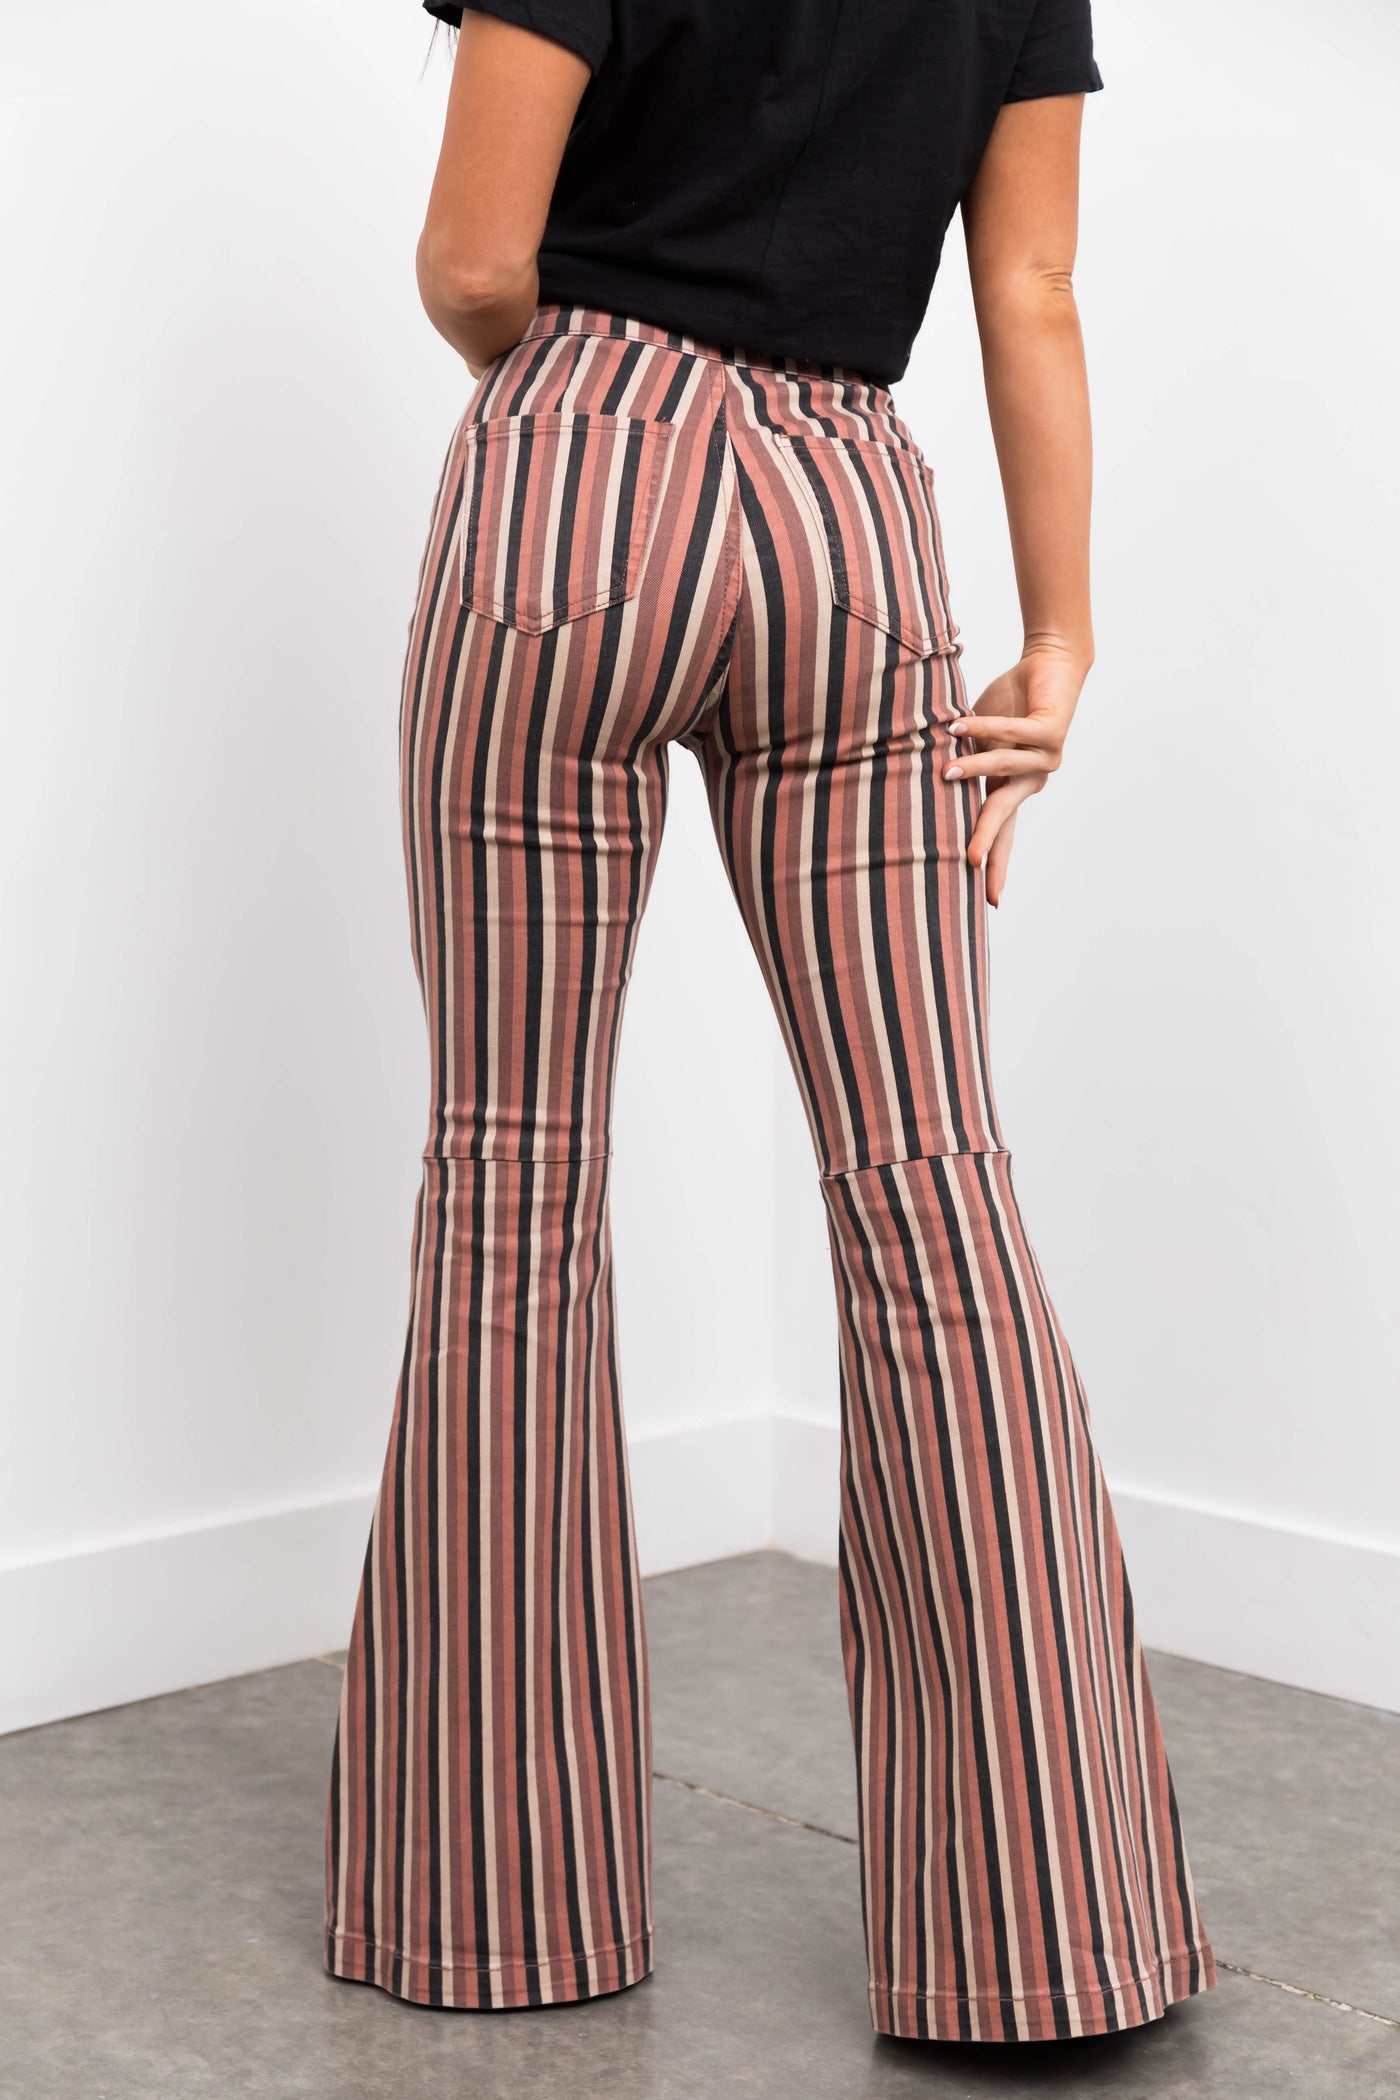 KanCan Rose Taupe Striped Super Flare Jeans